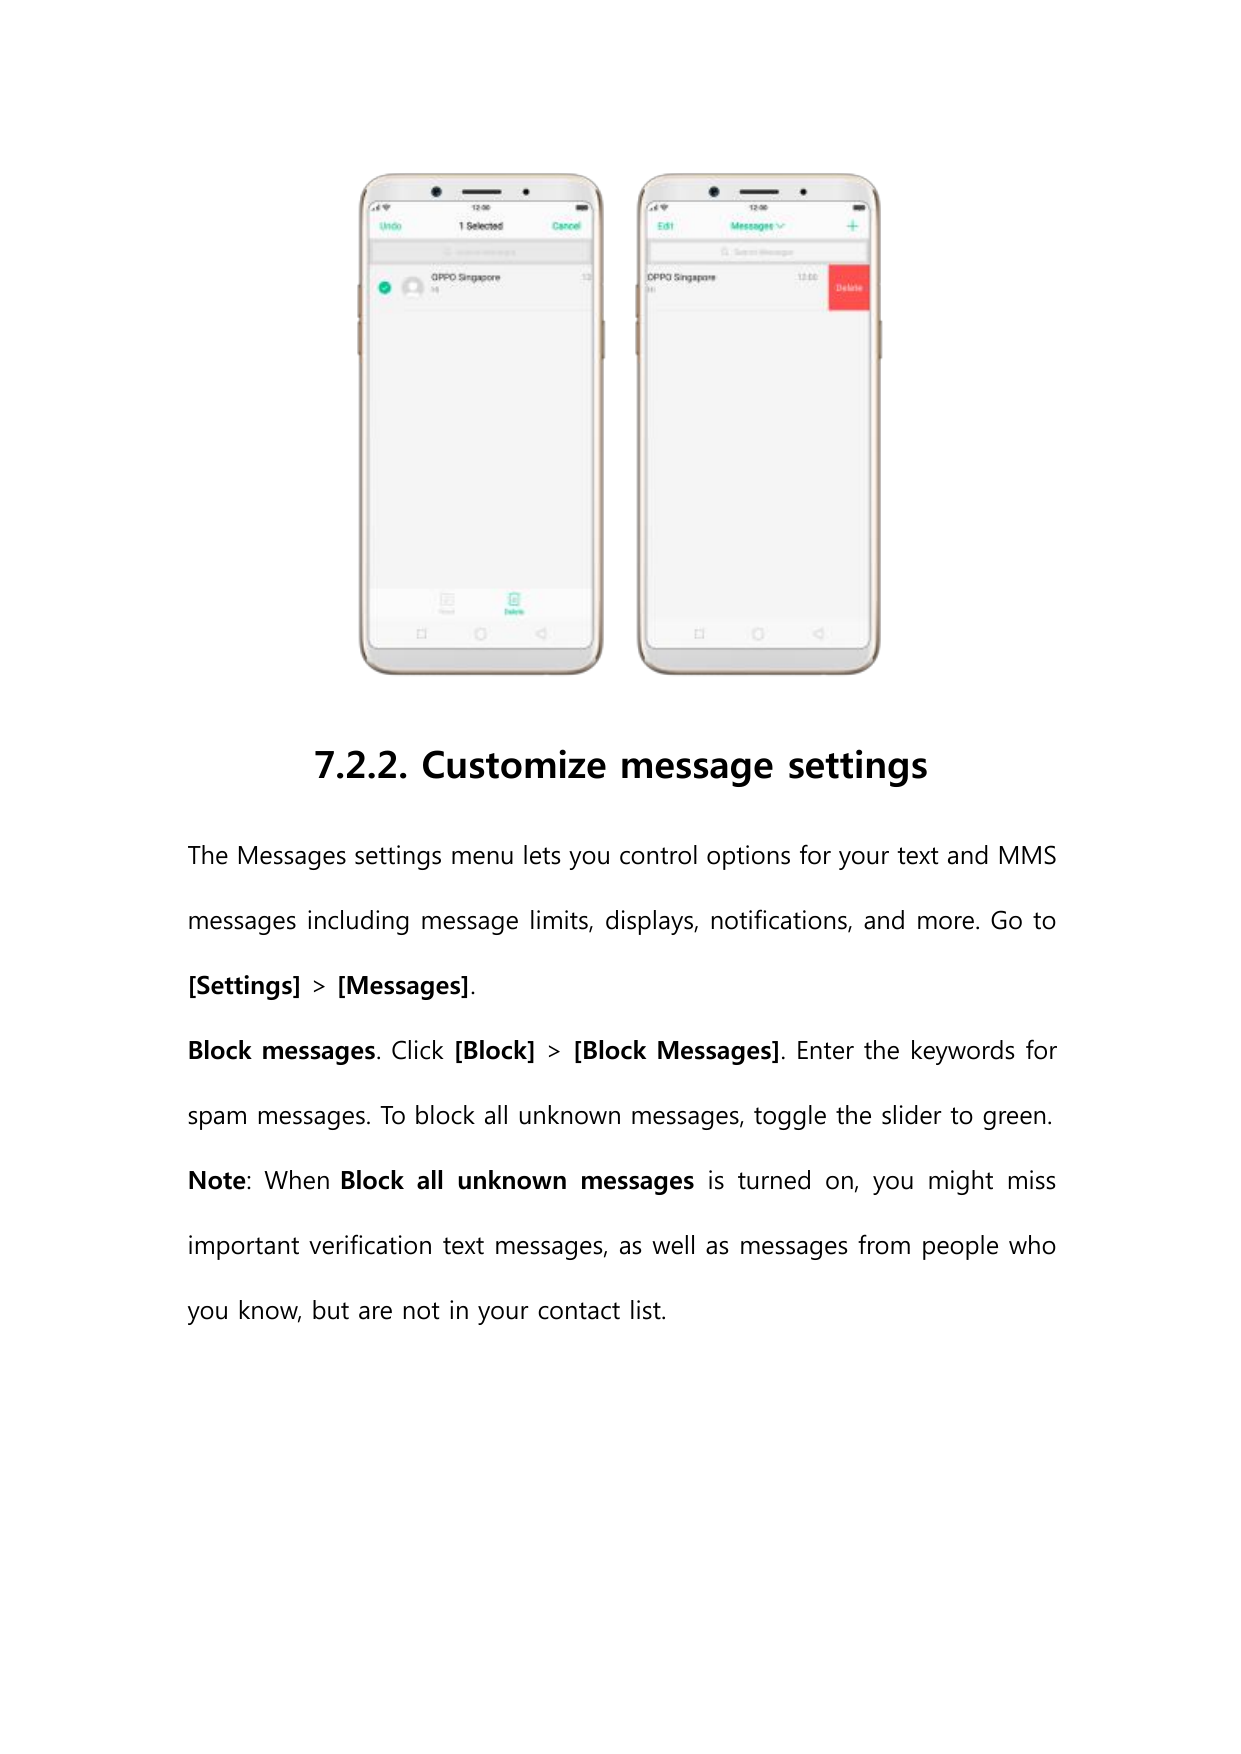 7.2.2. Customize message settingsThe Messages settings menu lets you control options for your text and MMSmessages including mes